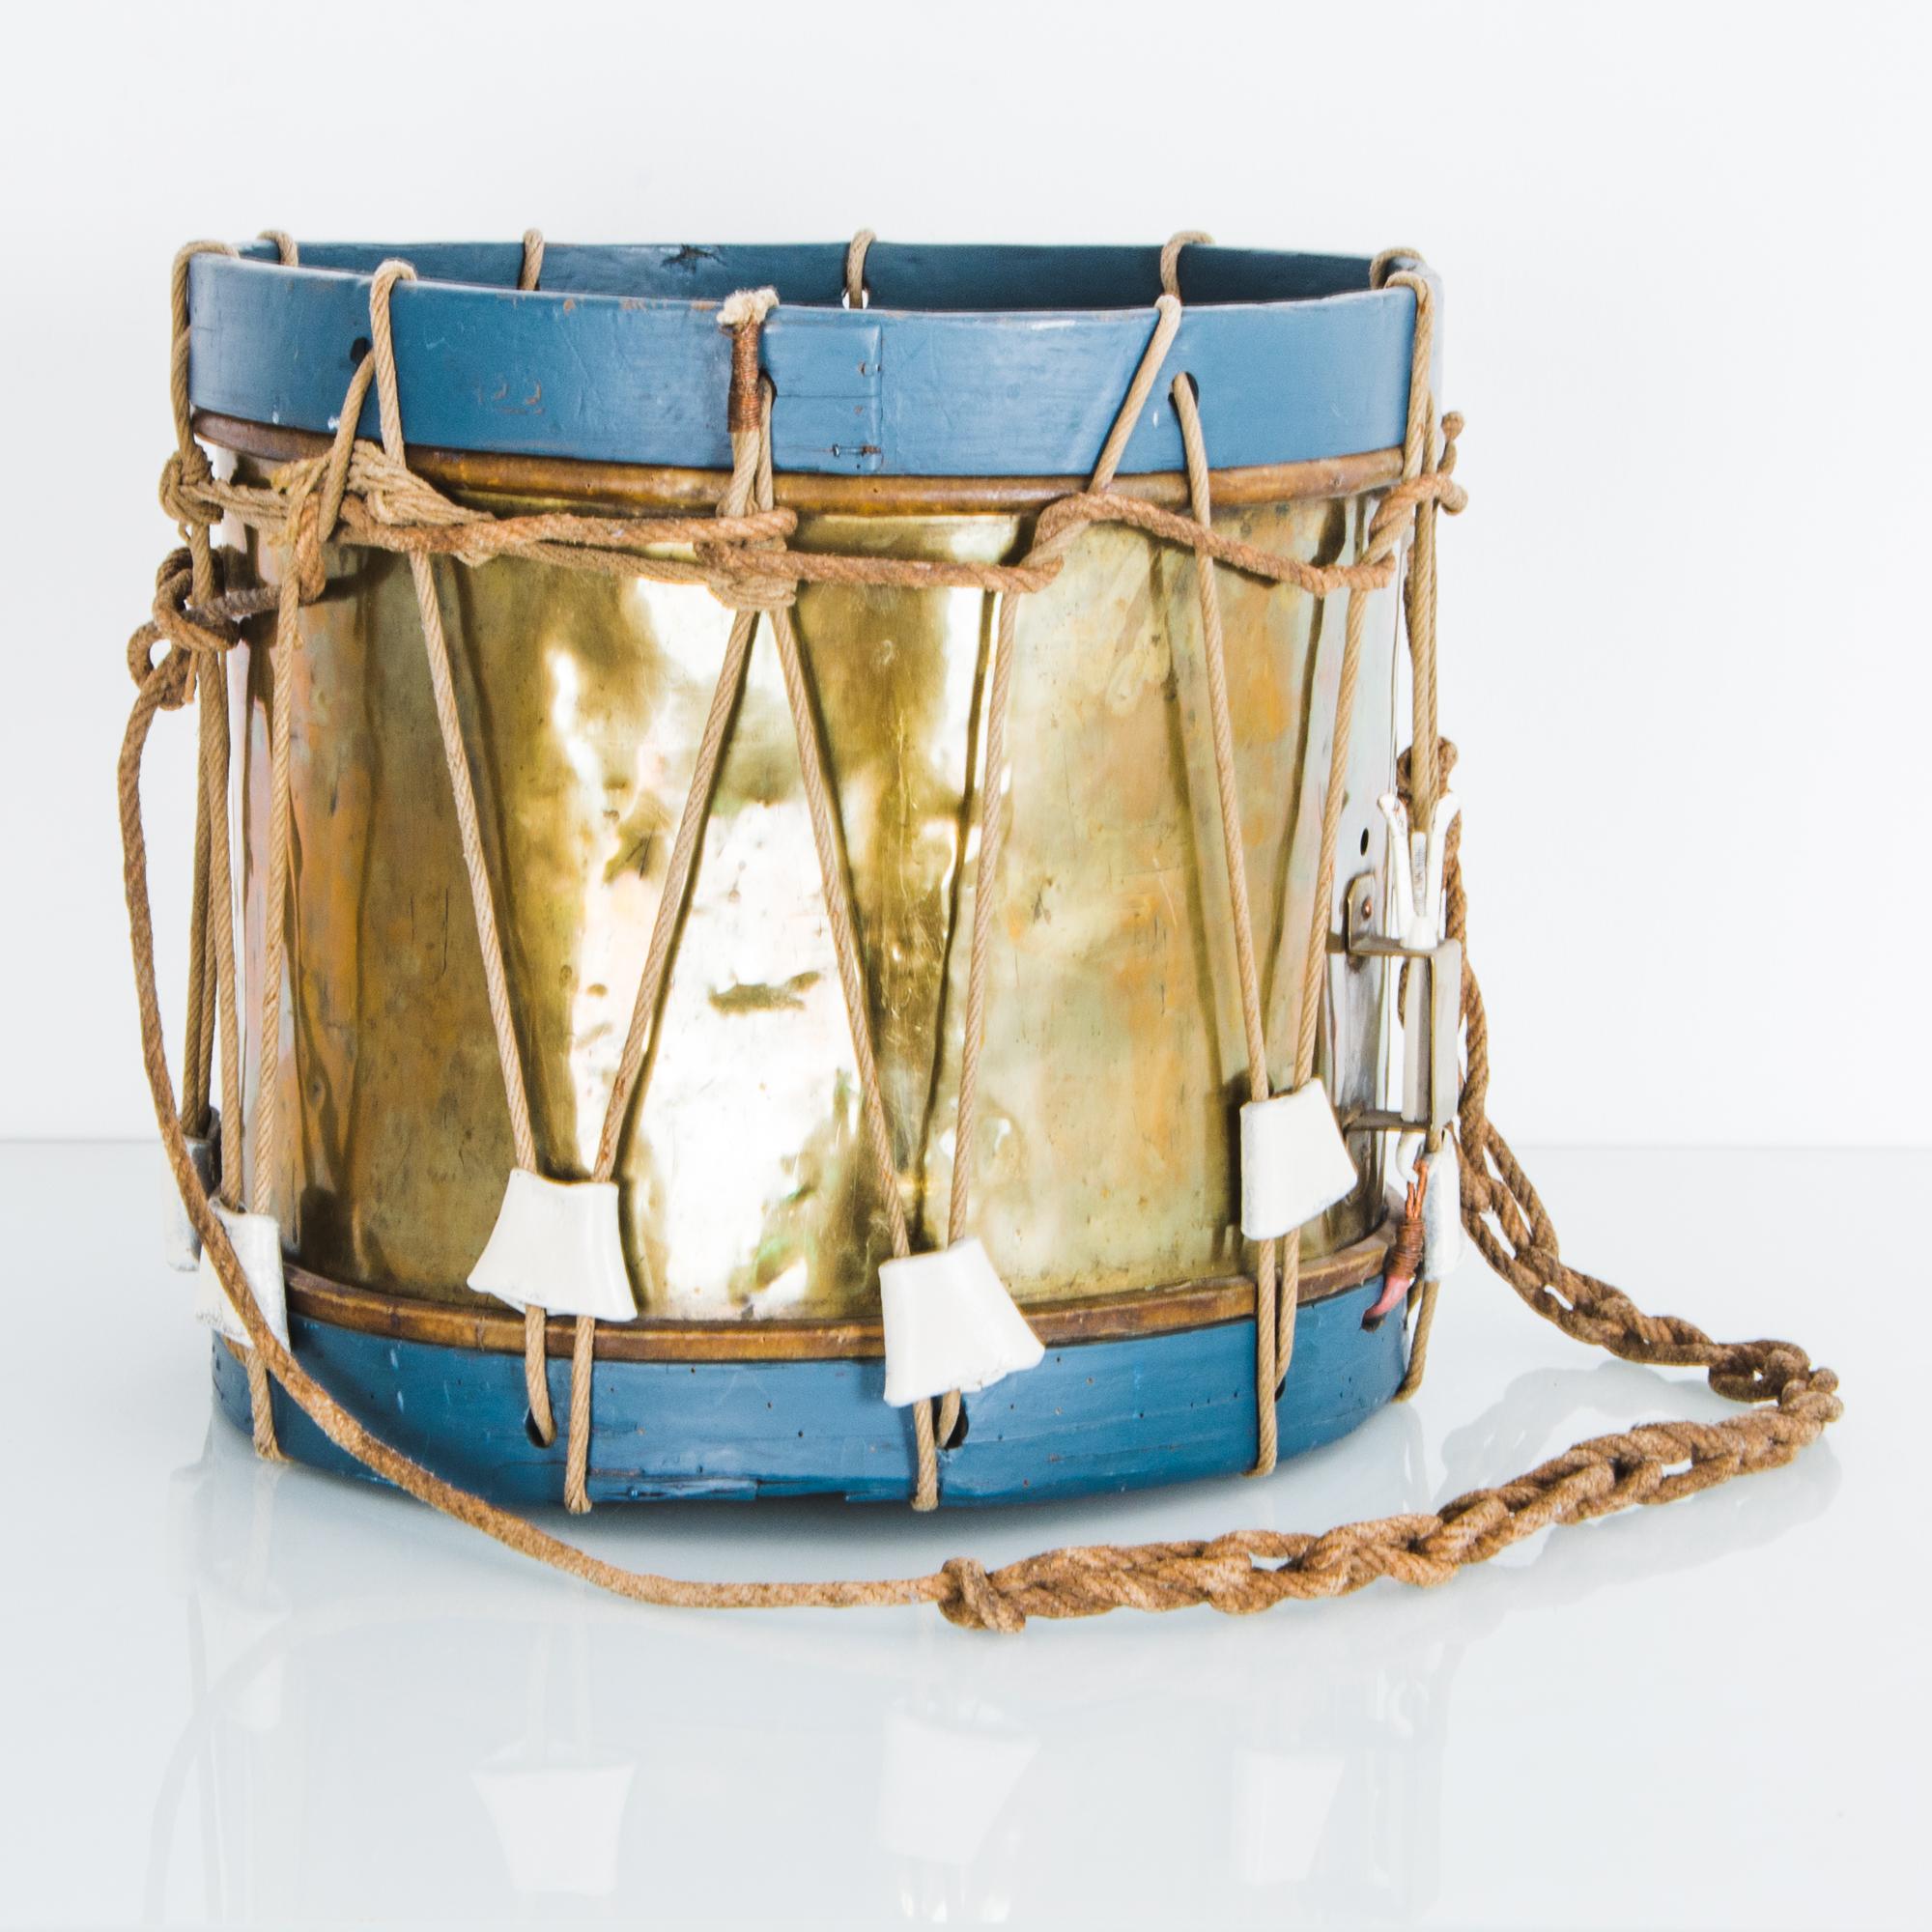 This antique drum hails from the United Kingdom, circa 1920. The shell of the drum is made of golden metal, while the wooden rims are painted a cheerful contrasting blue. The light weathering of drum-skin and drum-strap gives an antique charm to